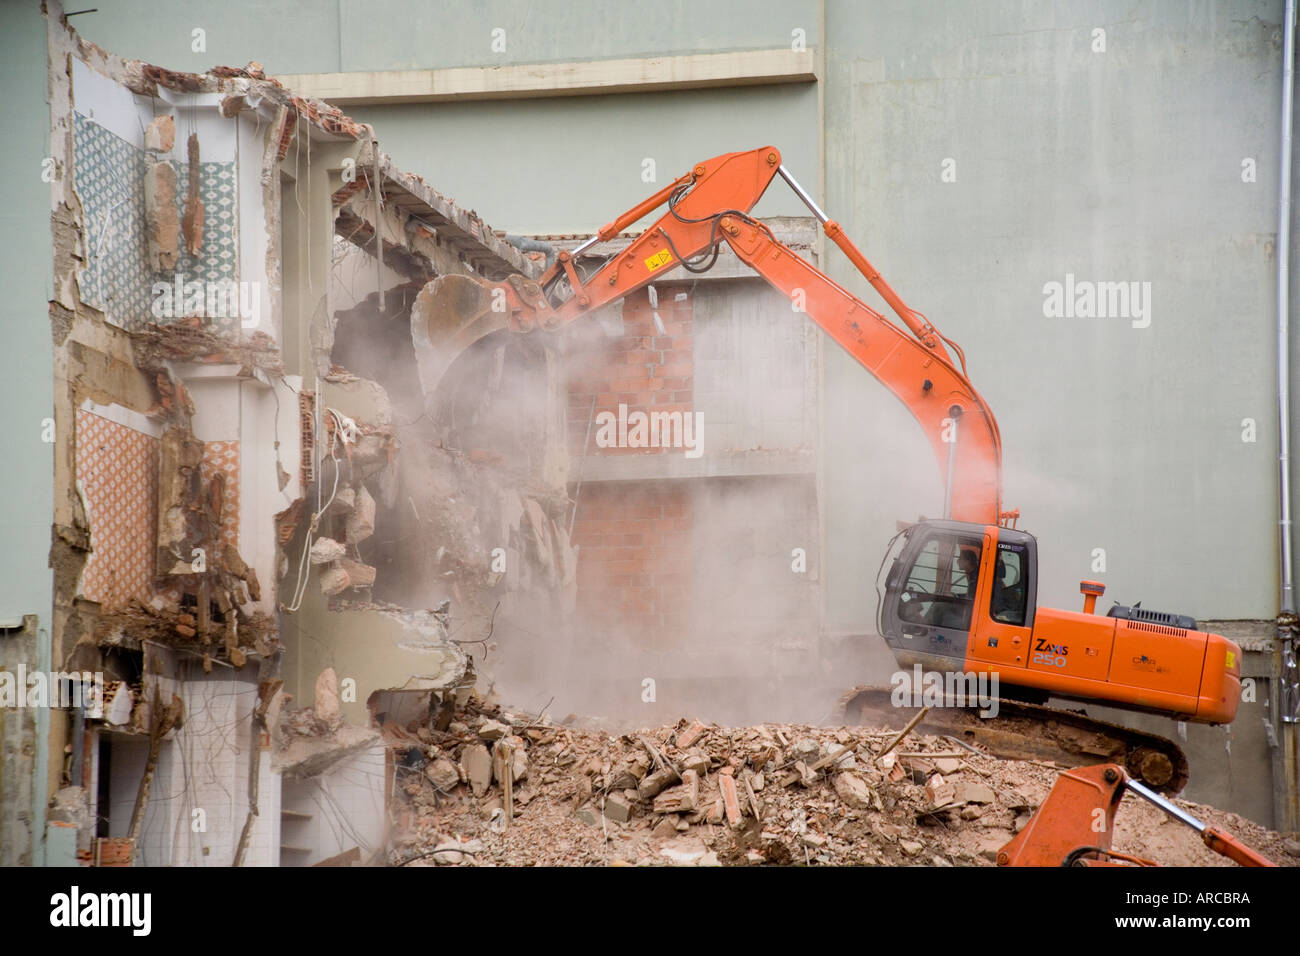 A backhoe is used to demolish a reinforced concrete building in Fatima Portugal Stock Photo